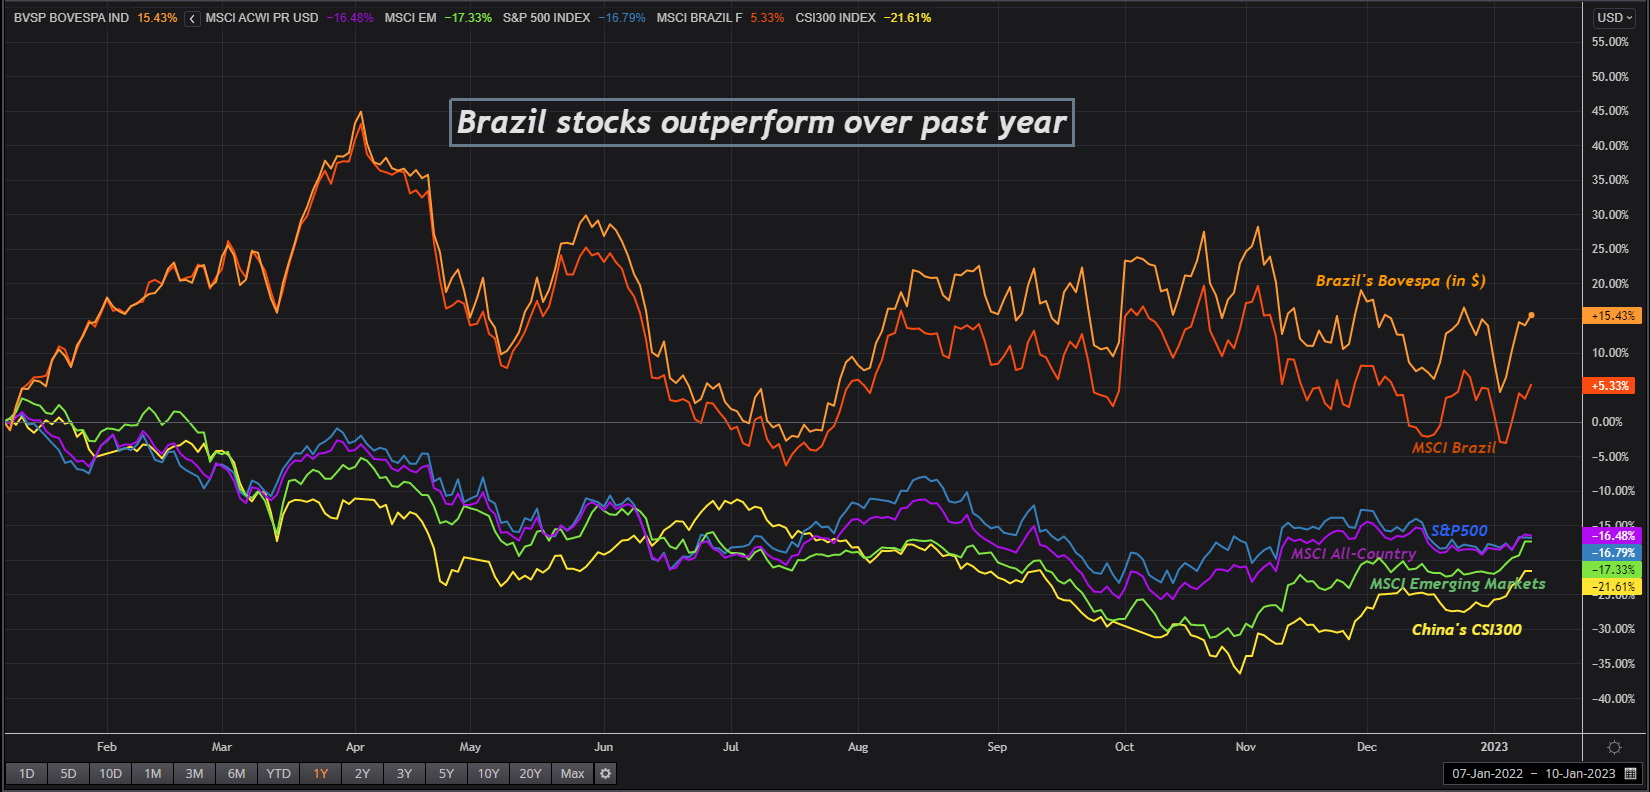 Brazil stocks outperform over the past year